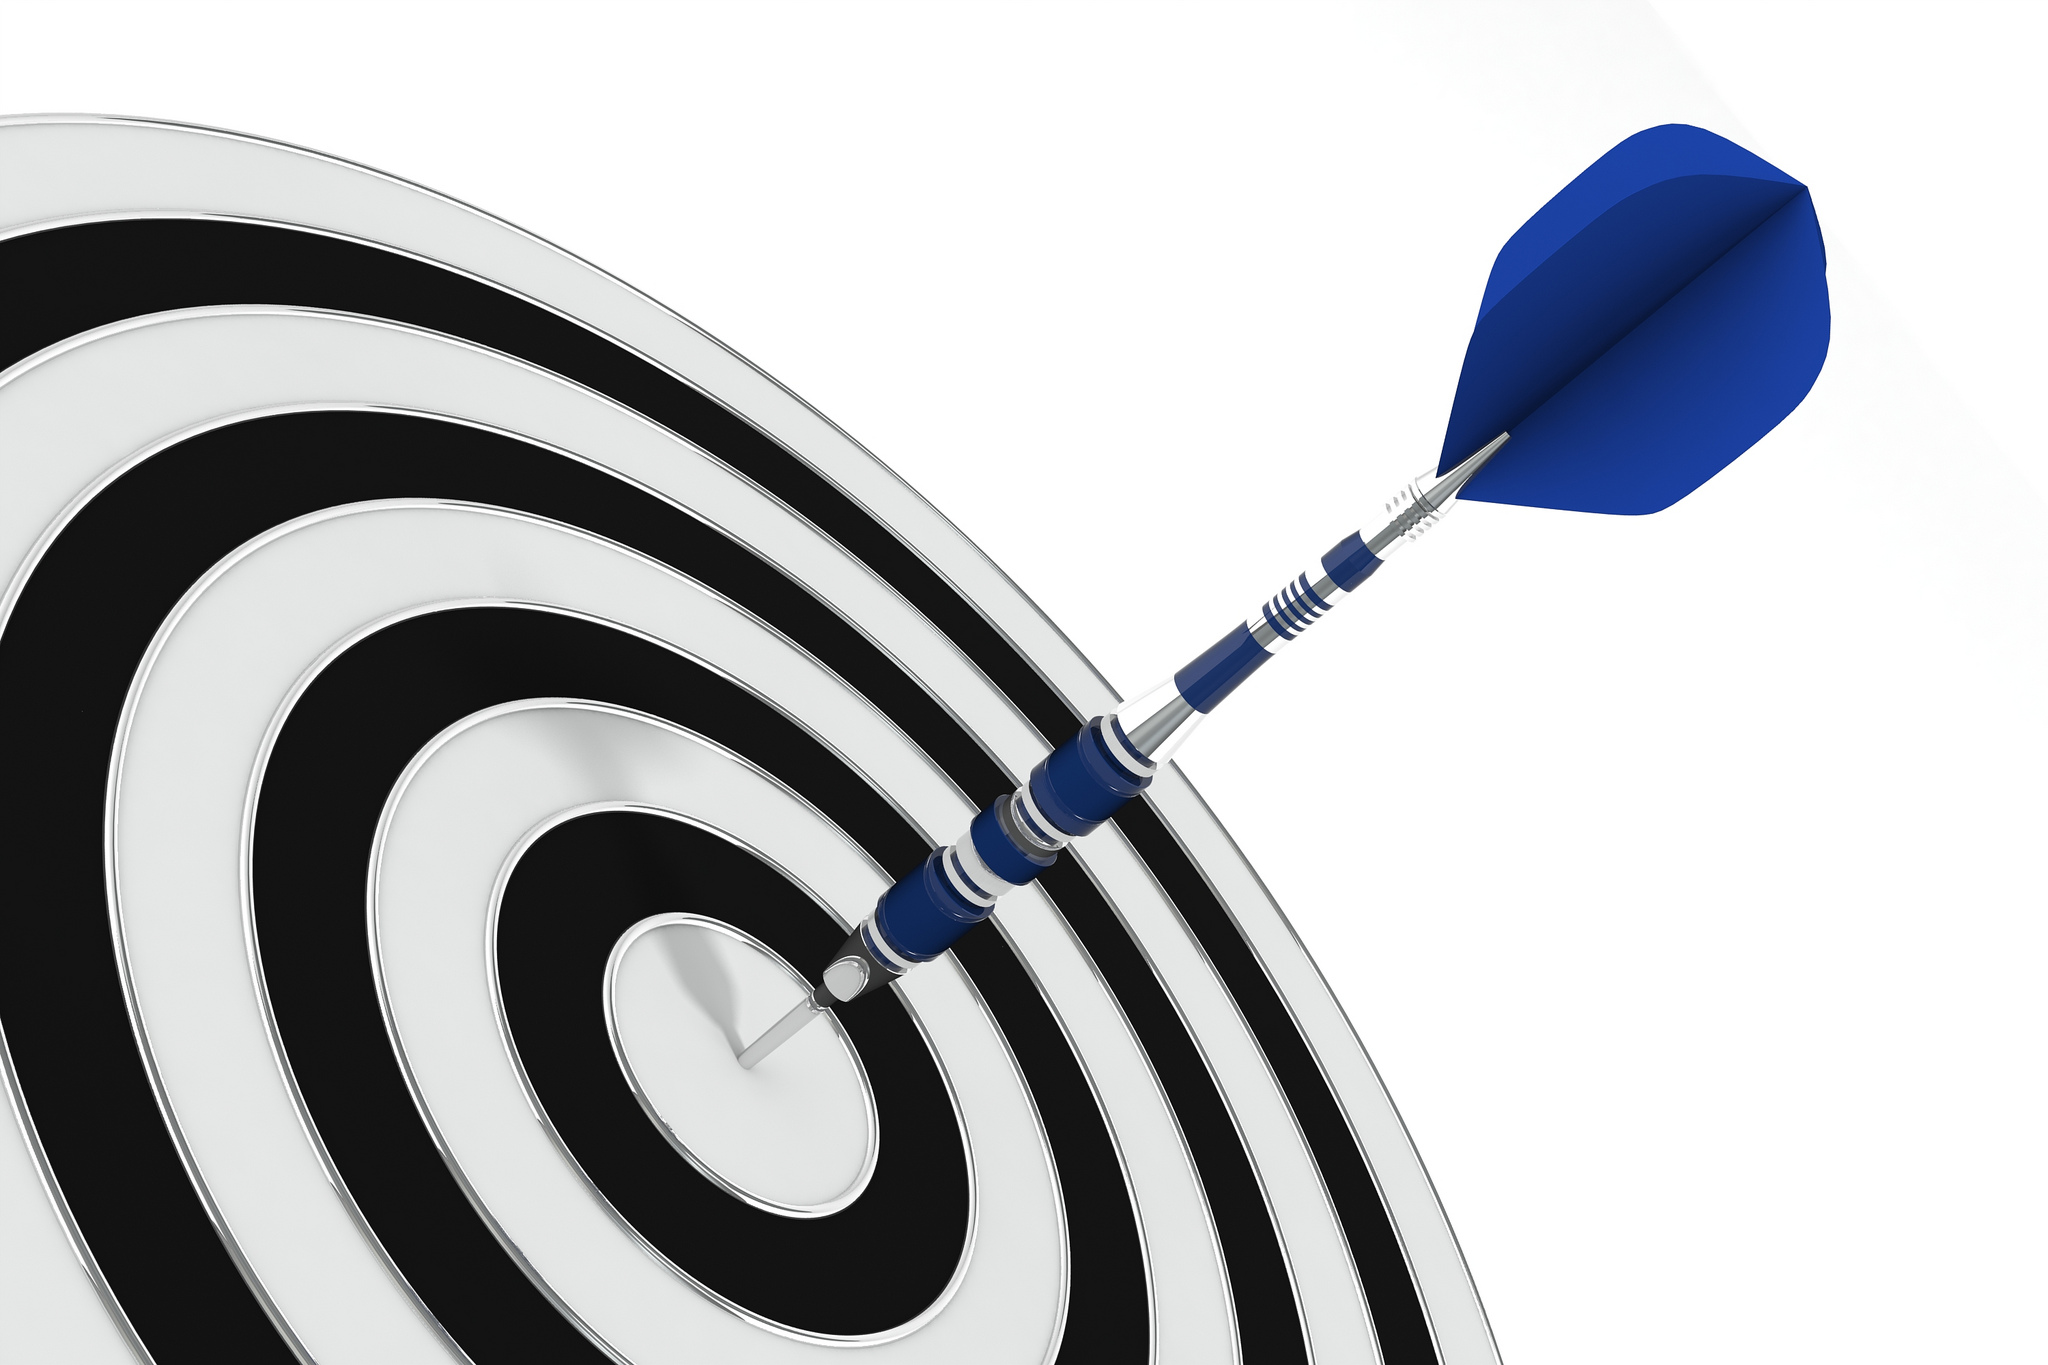 A dart in a bullseye, published as part of "3 Common Social Media Marketing Challenges and How to Solve Them"